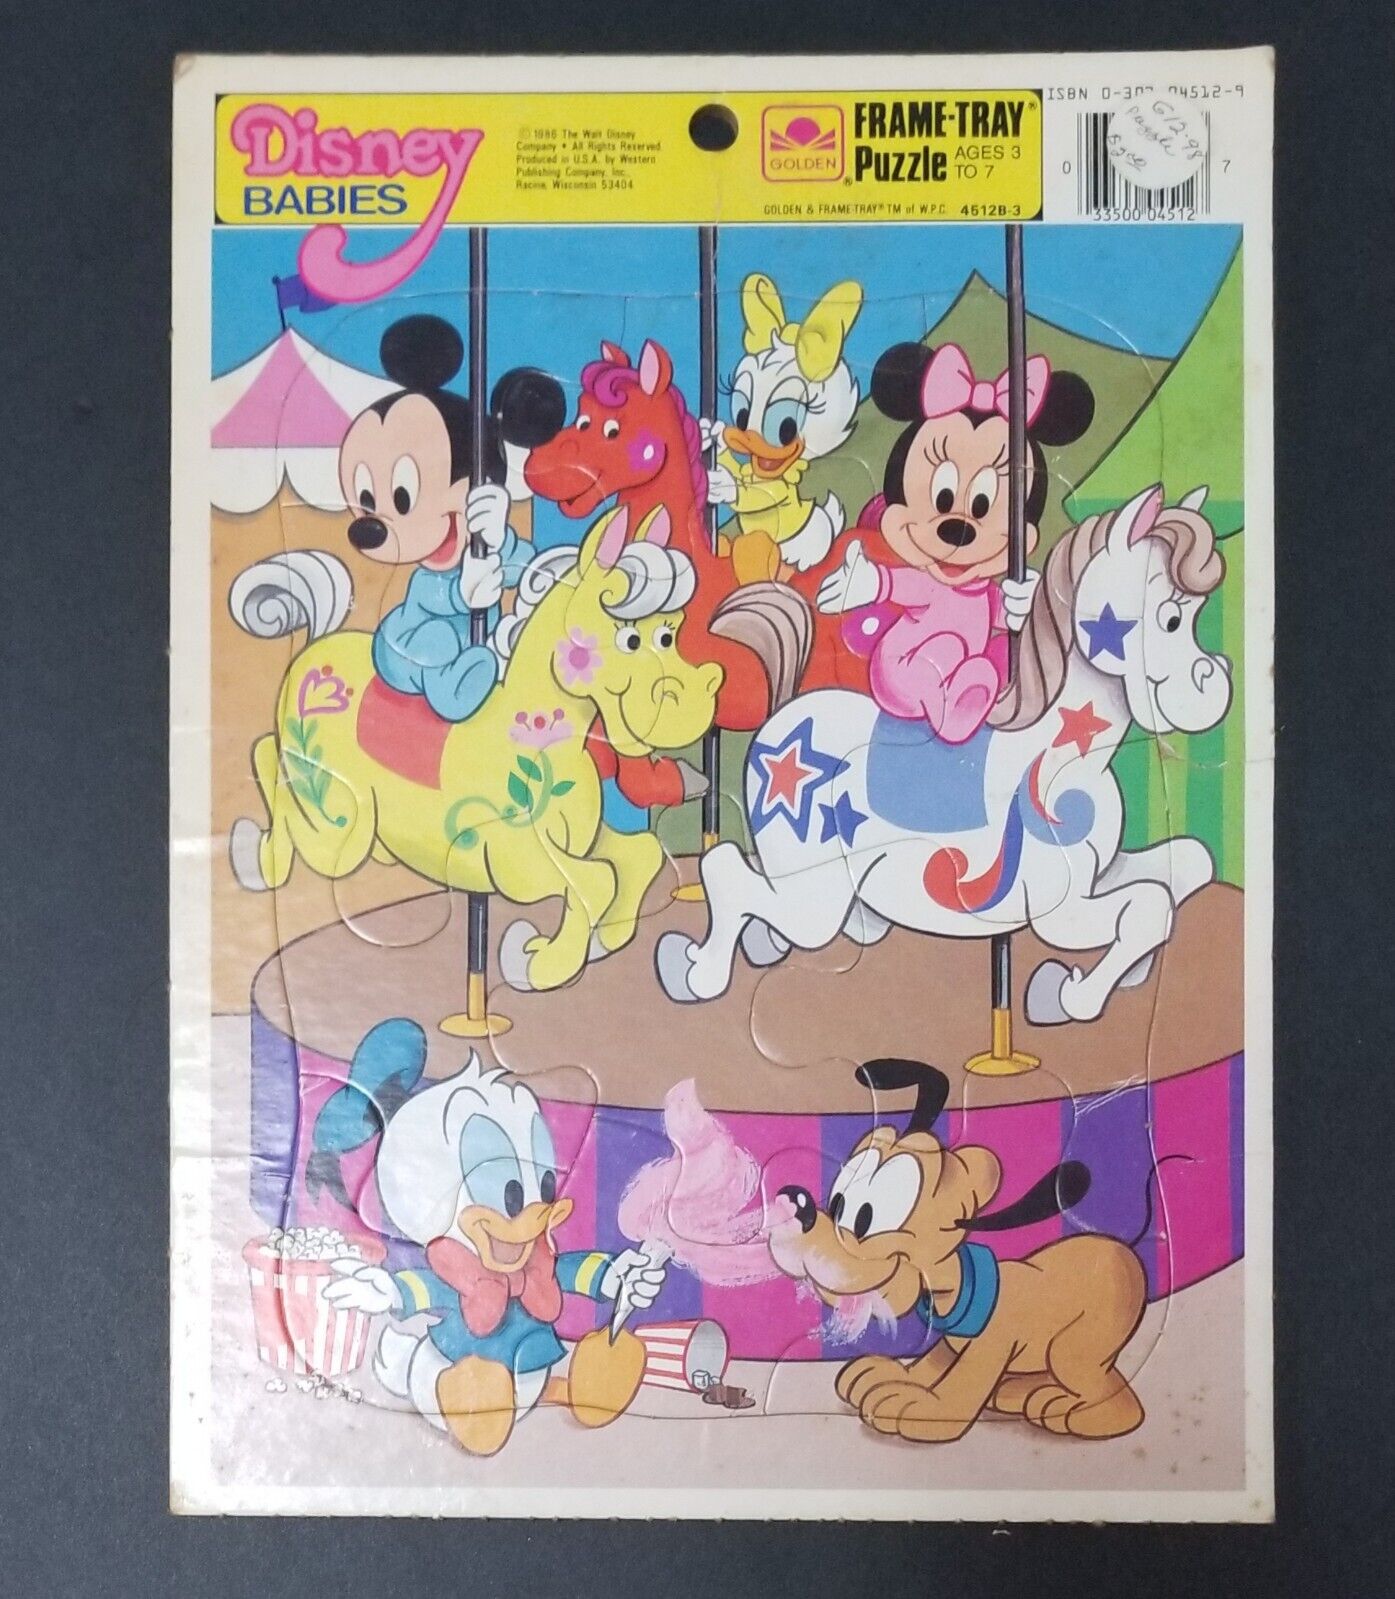 DISNEY BABIES 1986 Golden Frame Tray Puzzle 4512-3 RACINE WI Made in USA